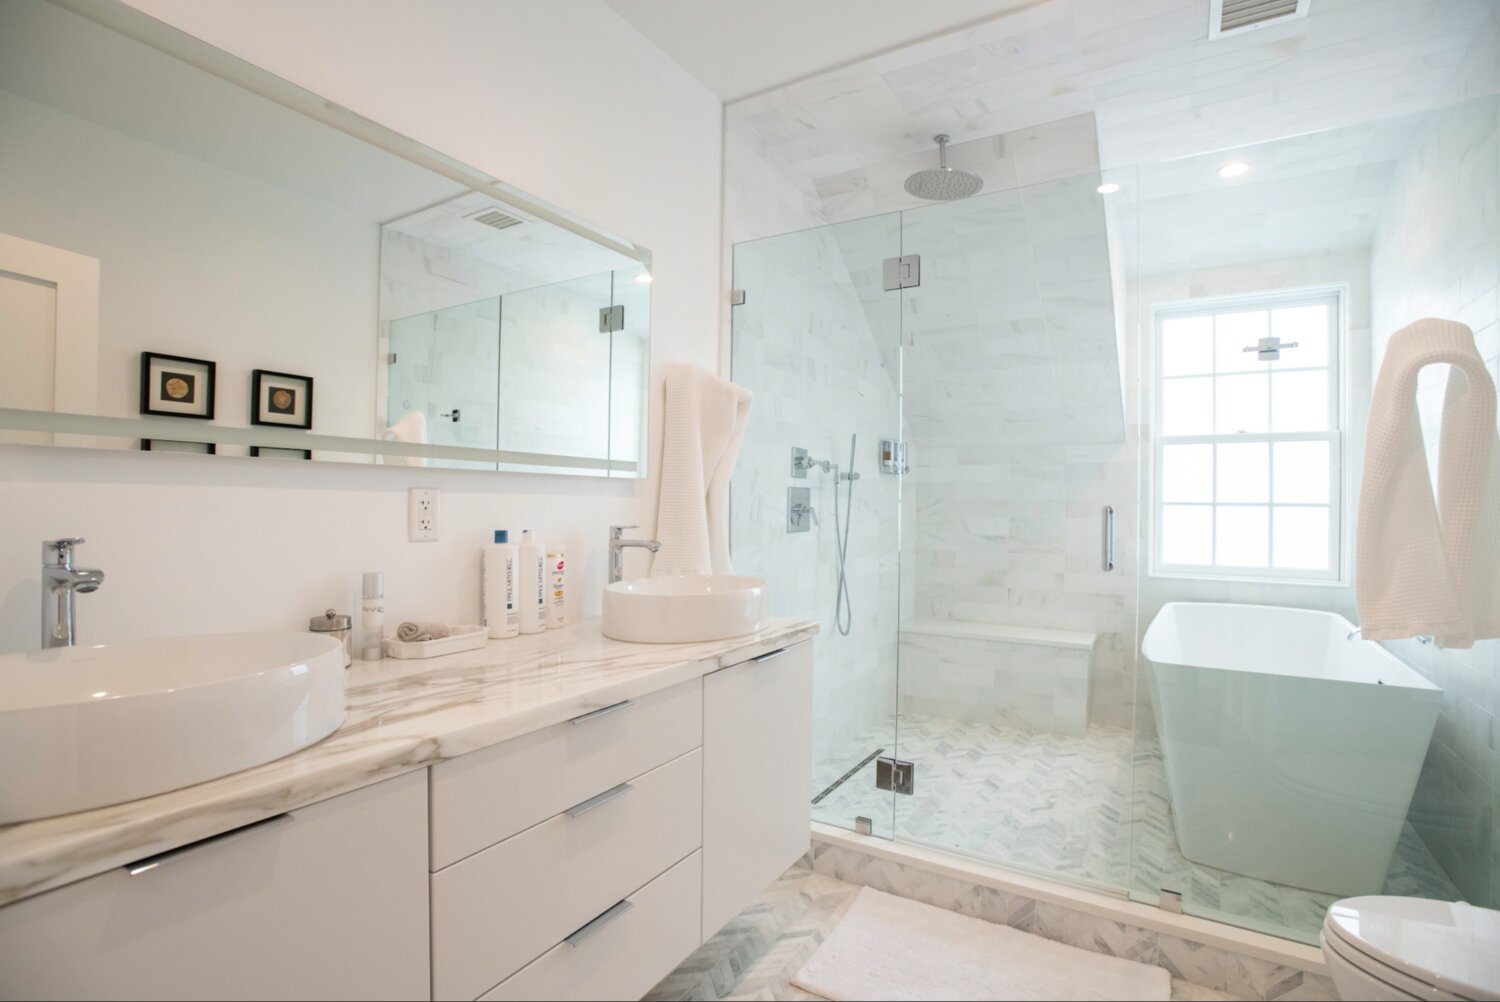 The master bath has dual vanities, a soaking tub and glass-enclosed shower.